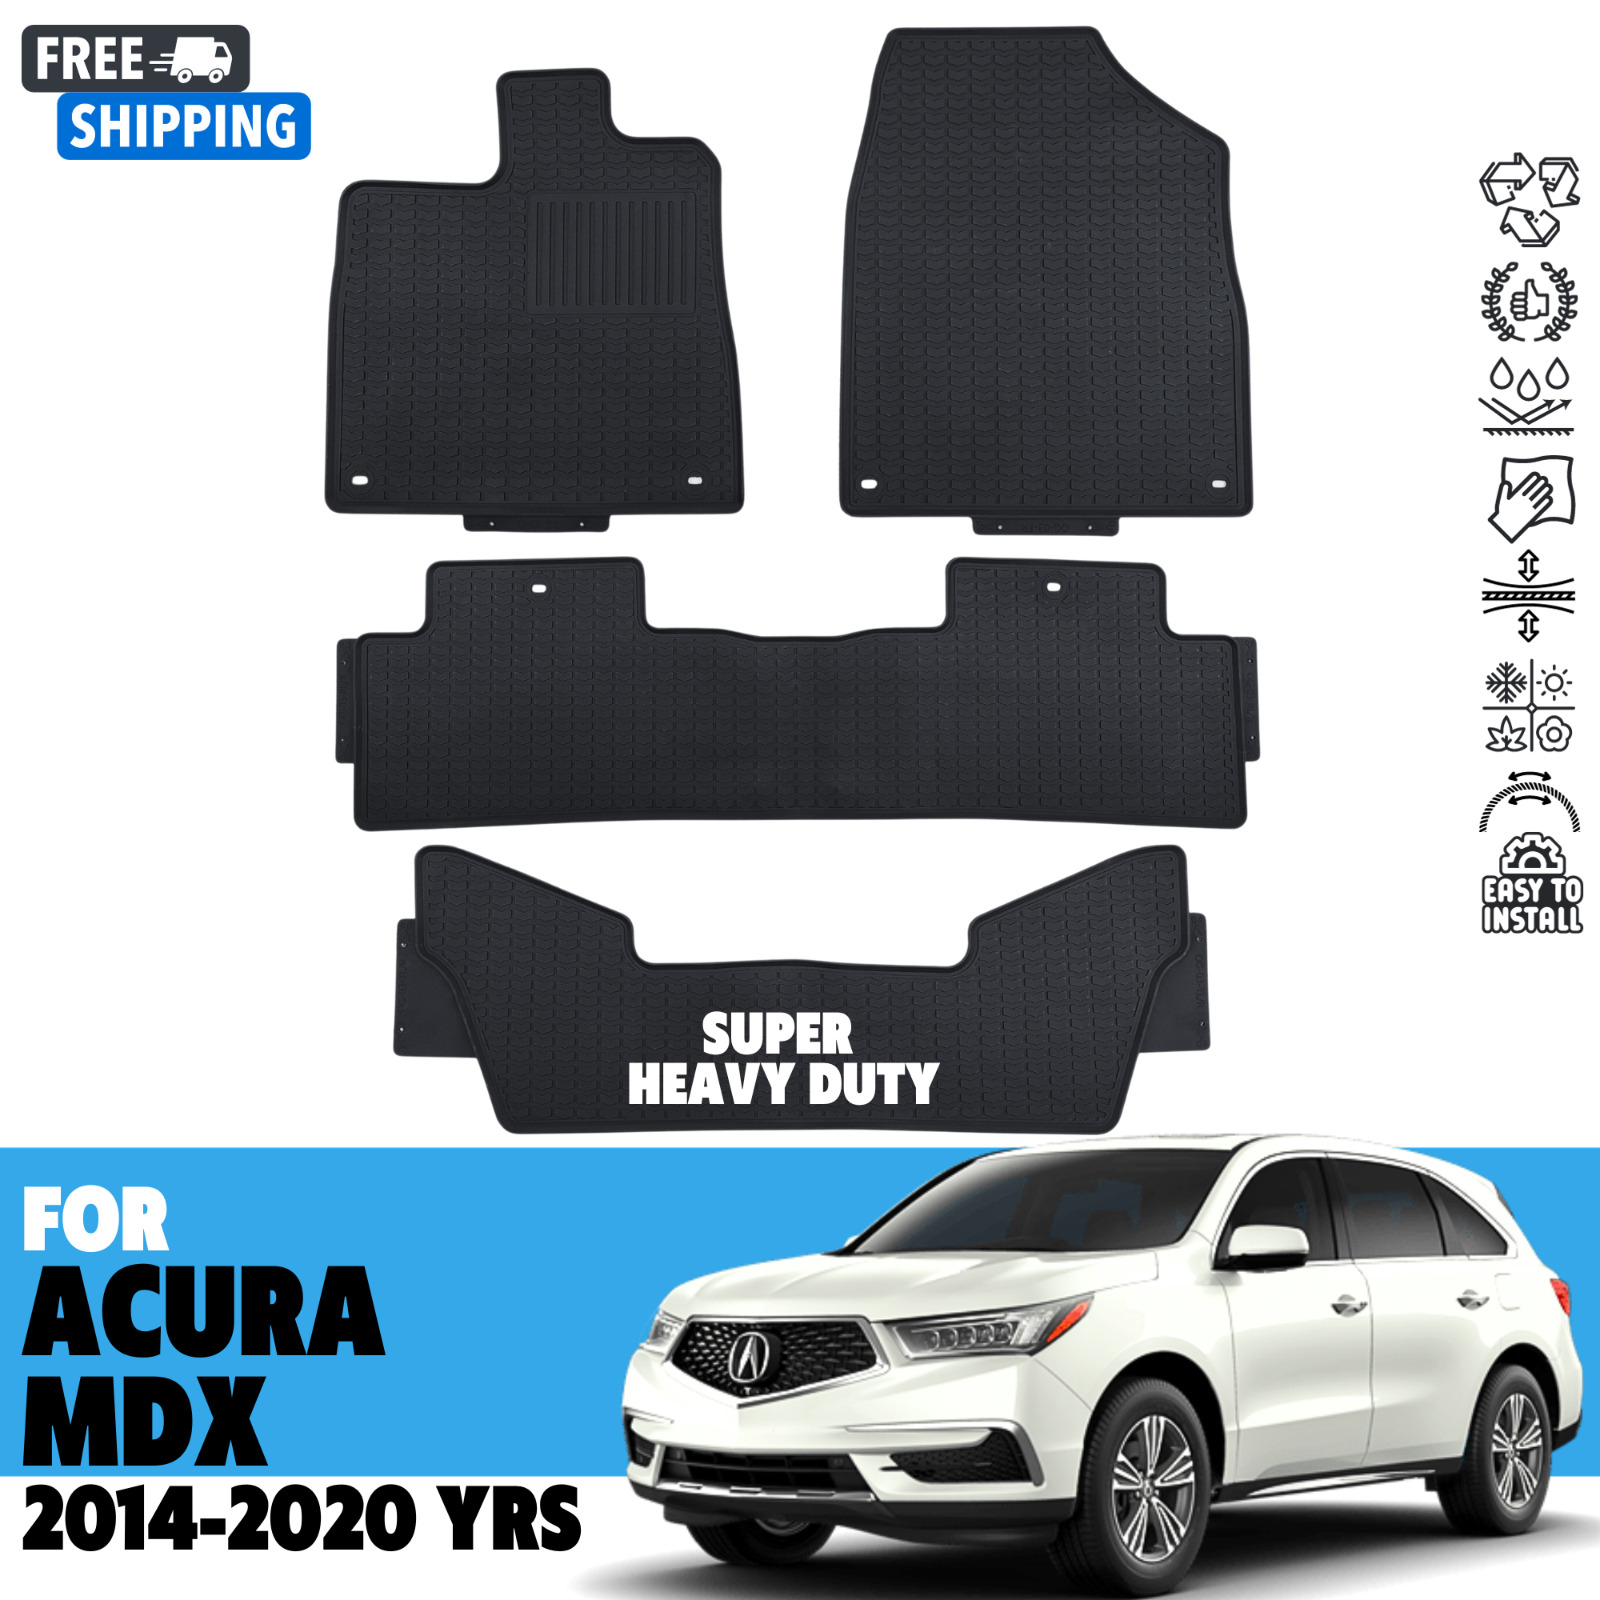 Floor mats for 2014-2020 ACURA MDX All Weather Super Heavy Duty Rubber